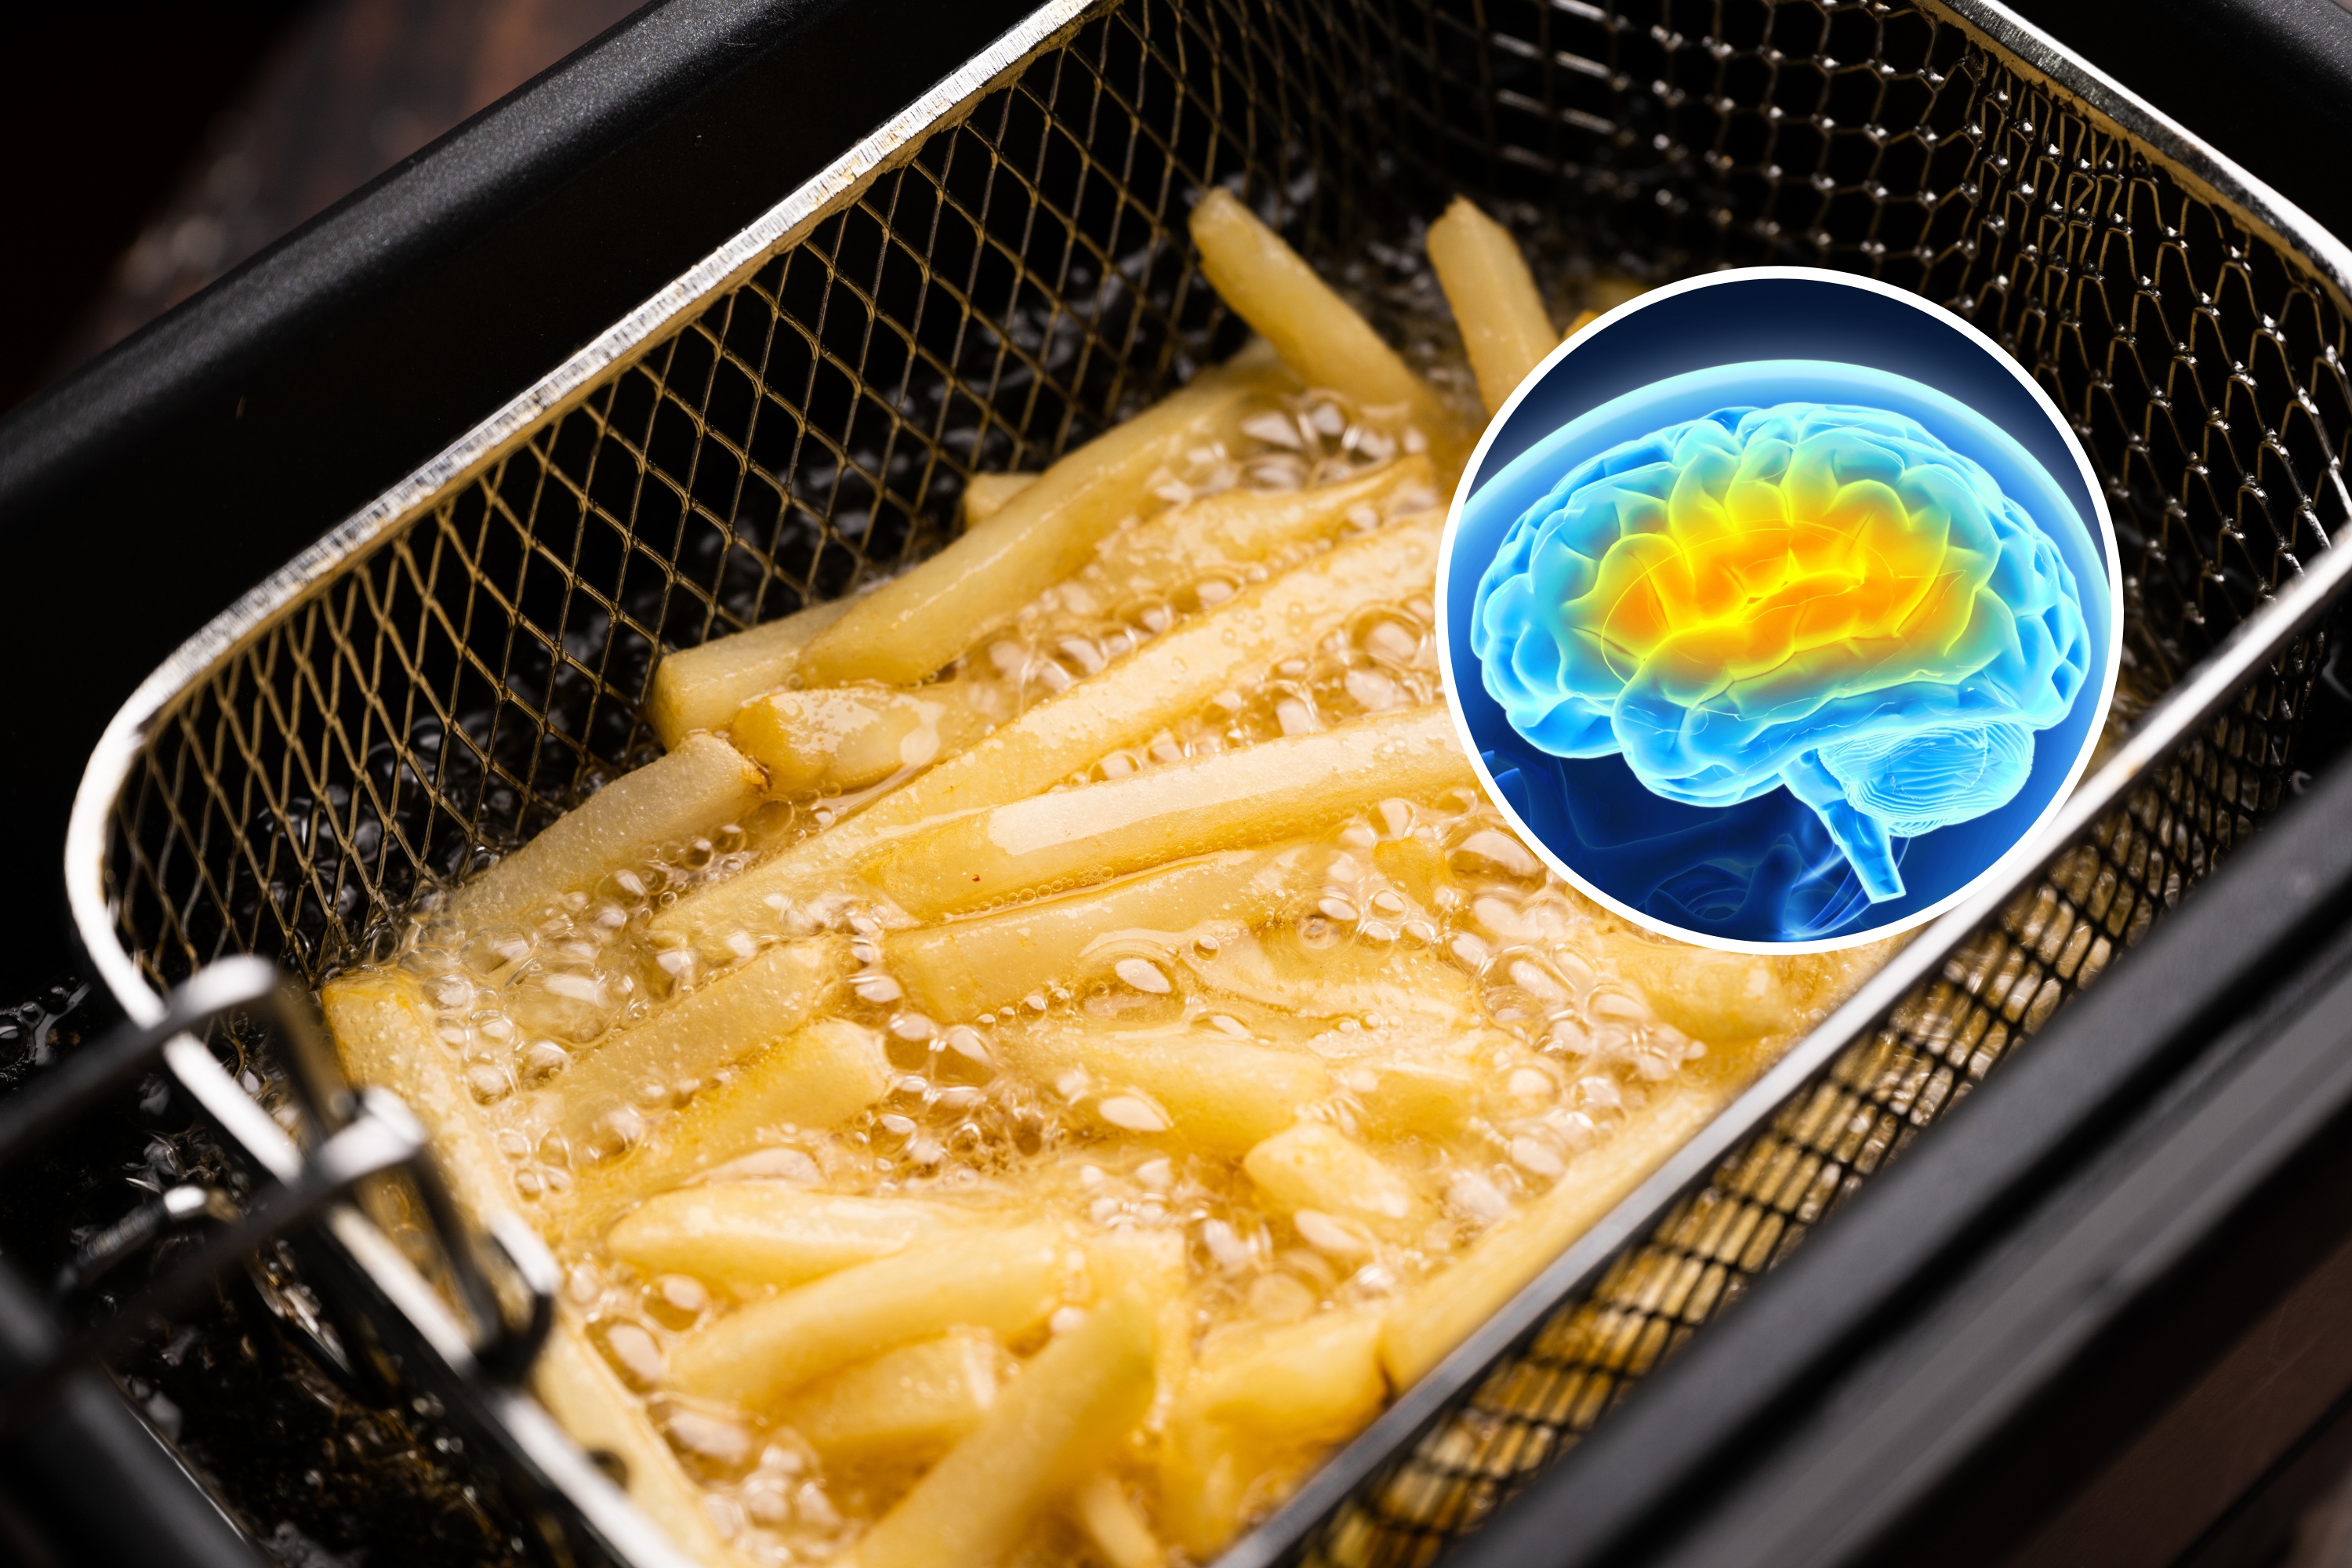 reused deep-frying oil may cause neurodegeneration